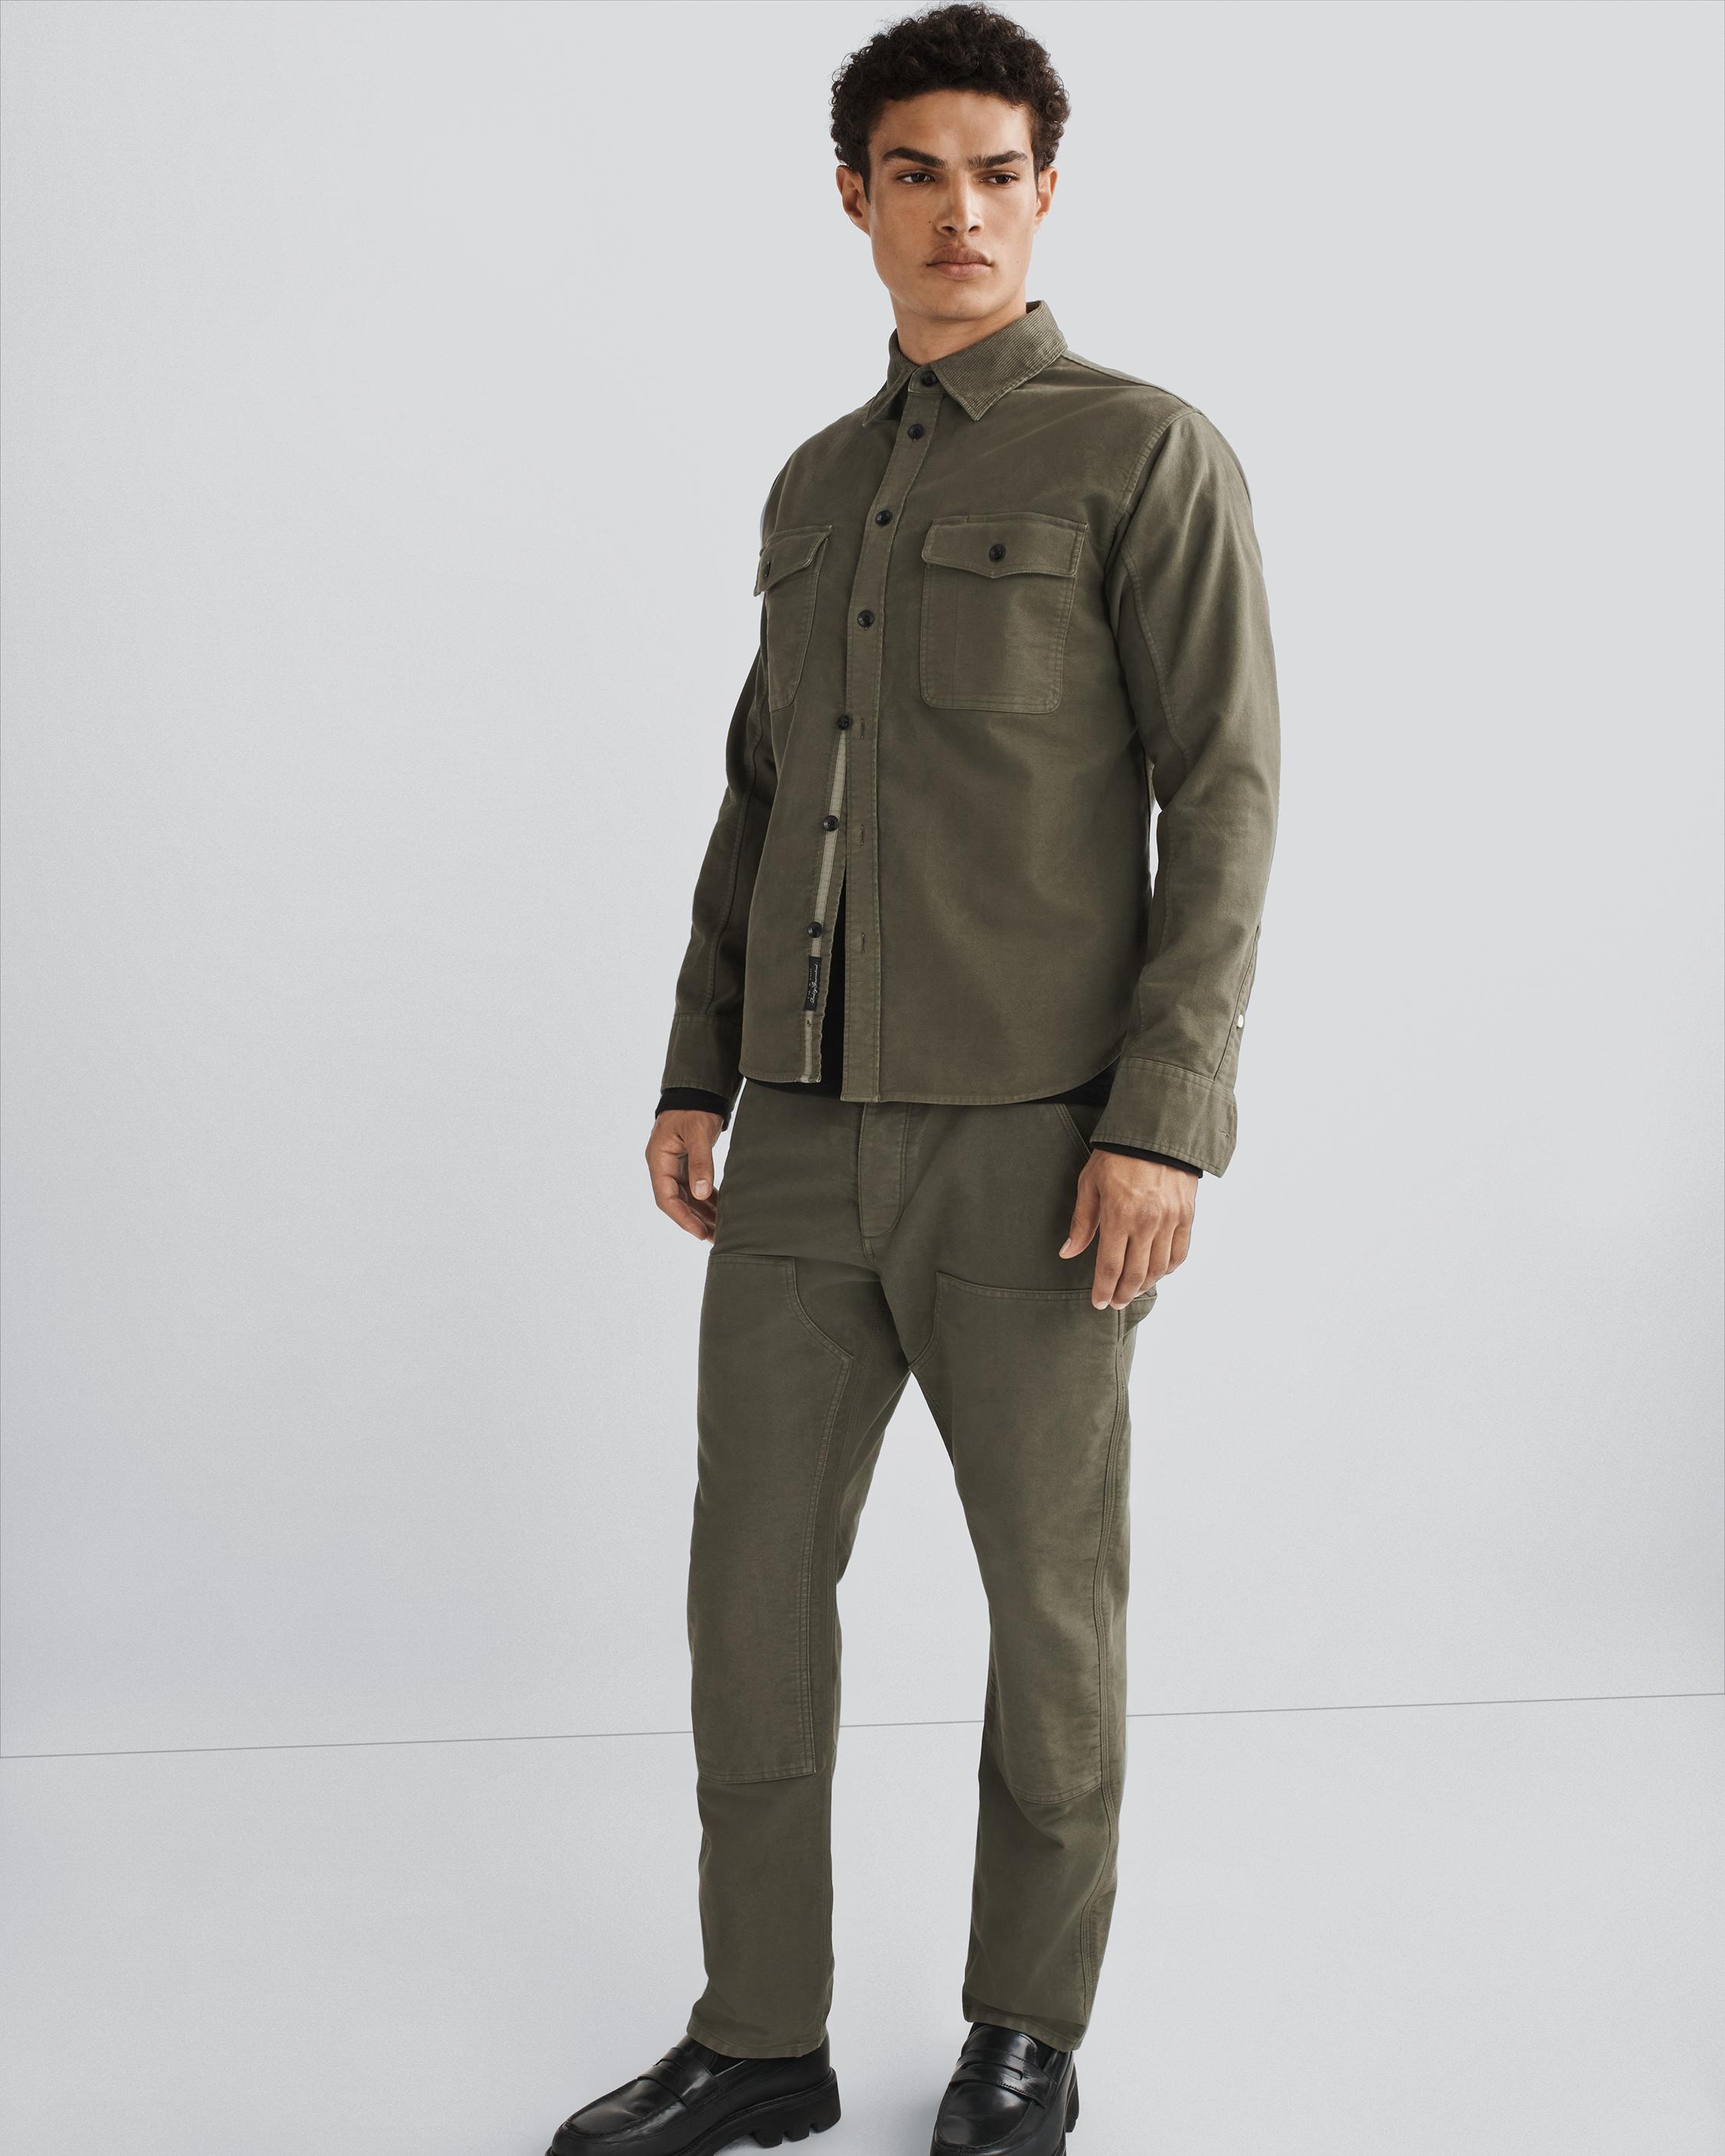 Engineered Moleskin Jack Shirt
Relaxed Fit Button Down - 6